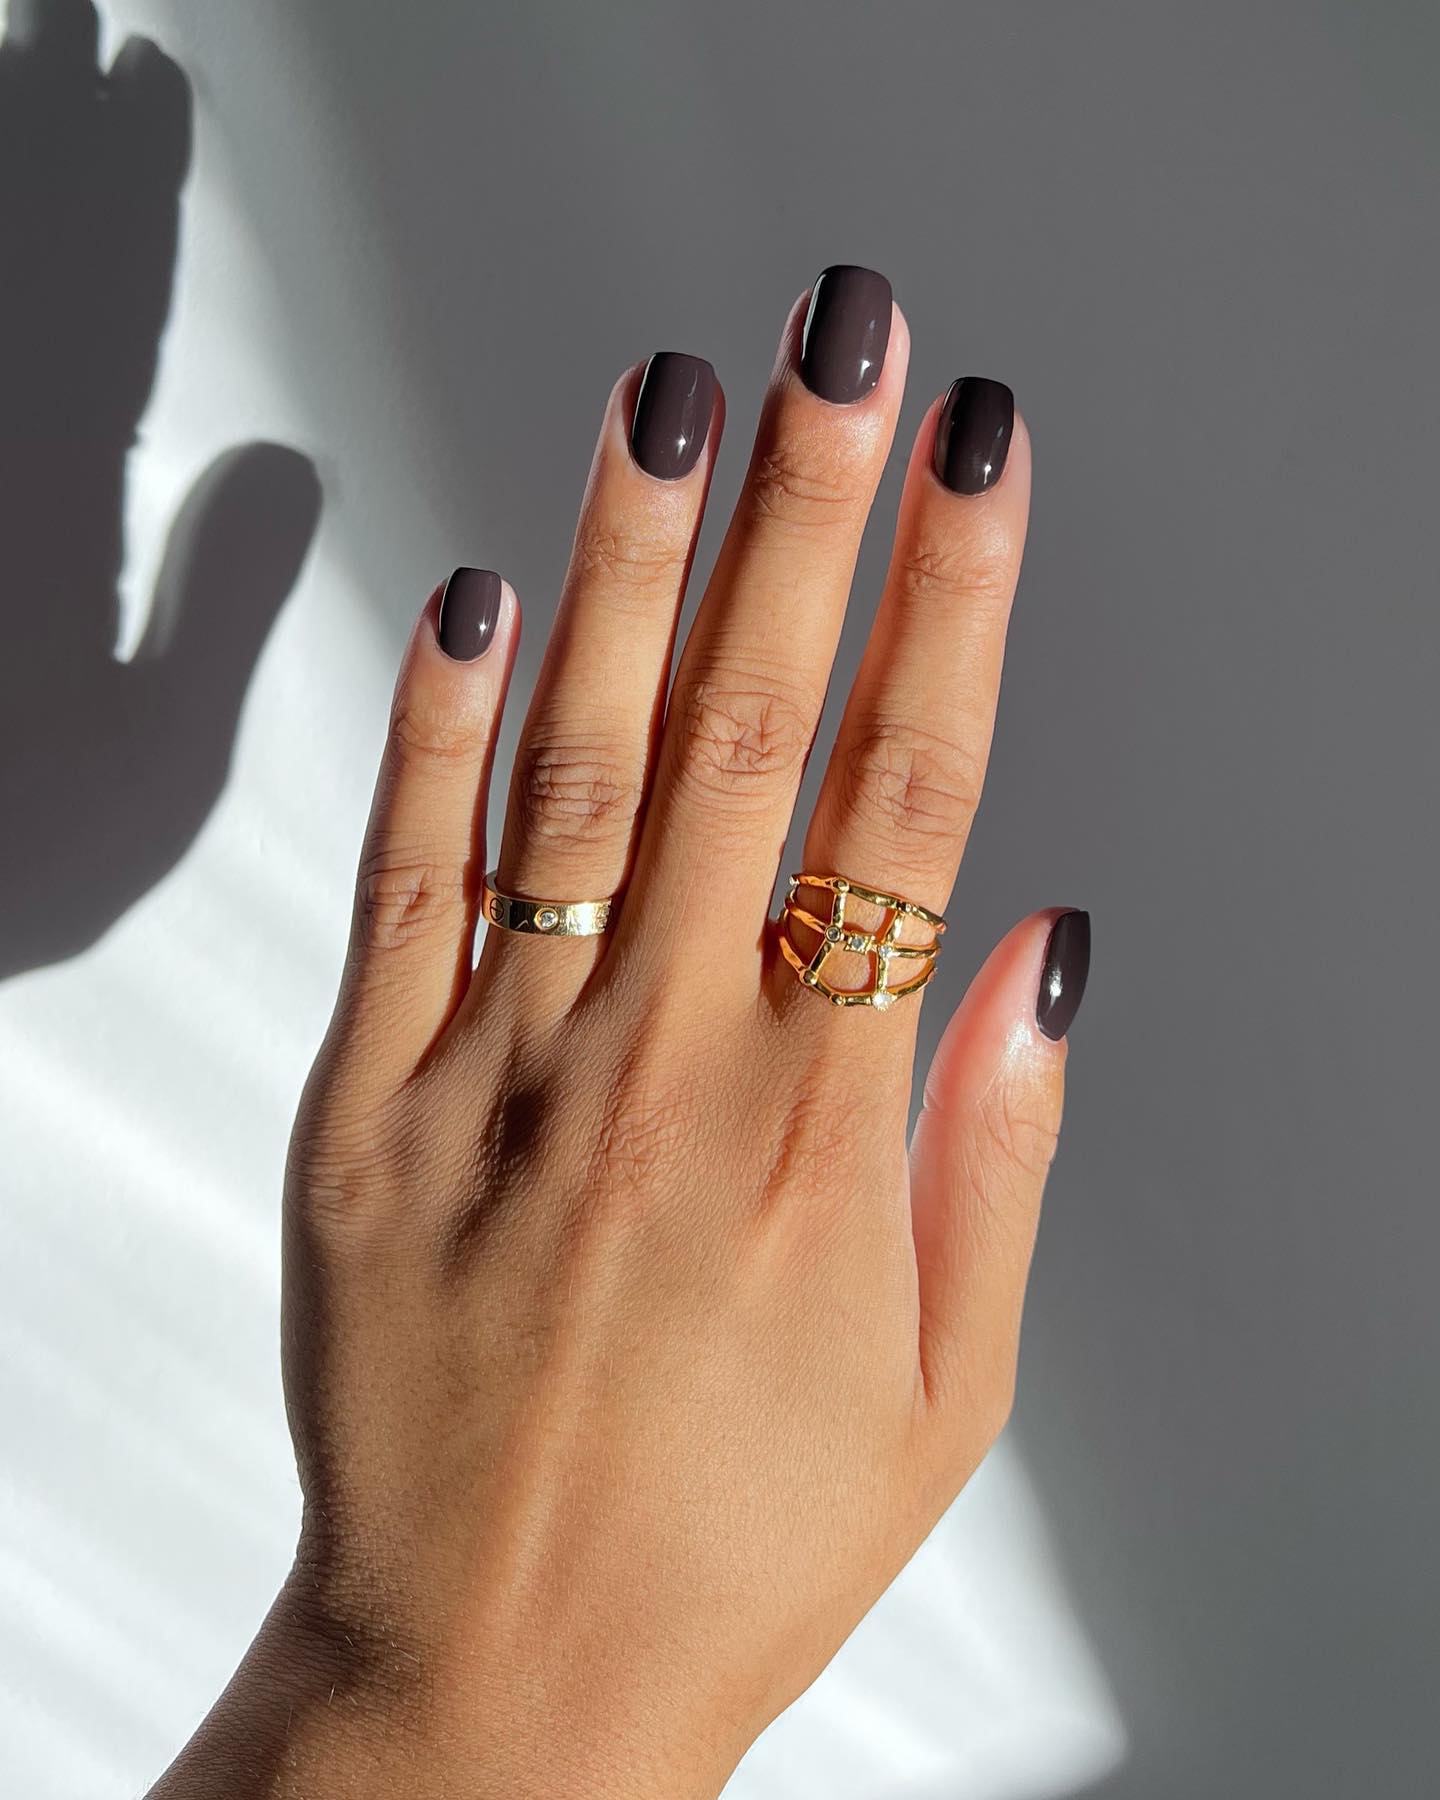 These Nails Trends Will Dominate 2023 According to Experts